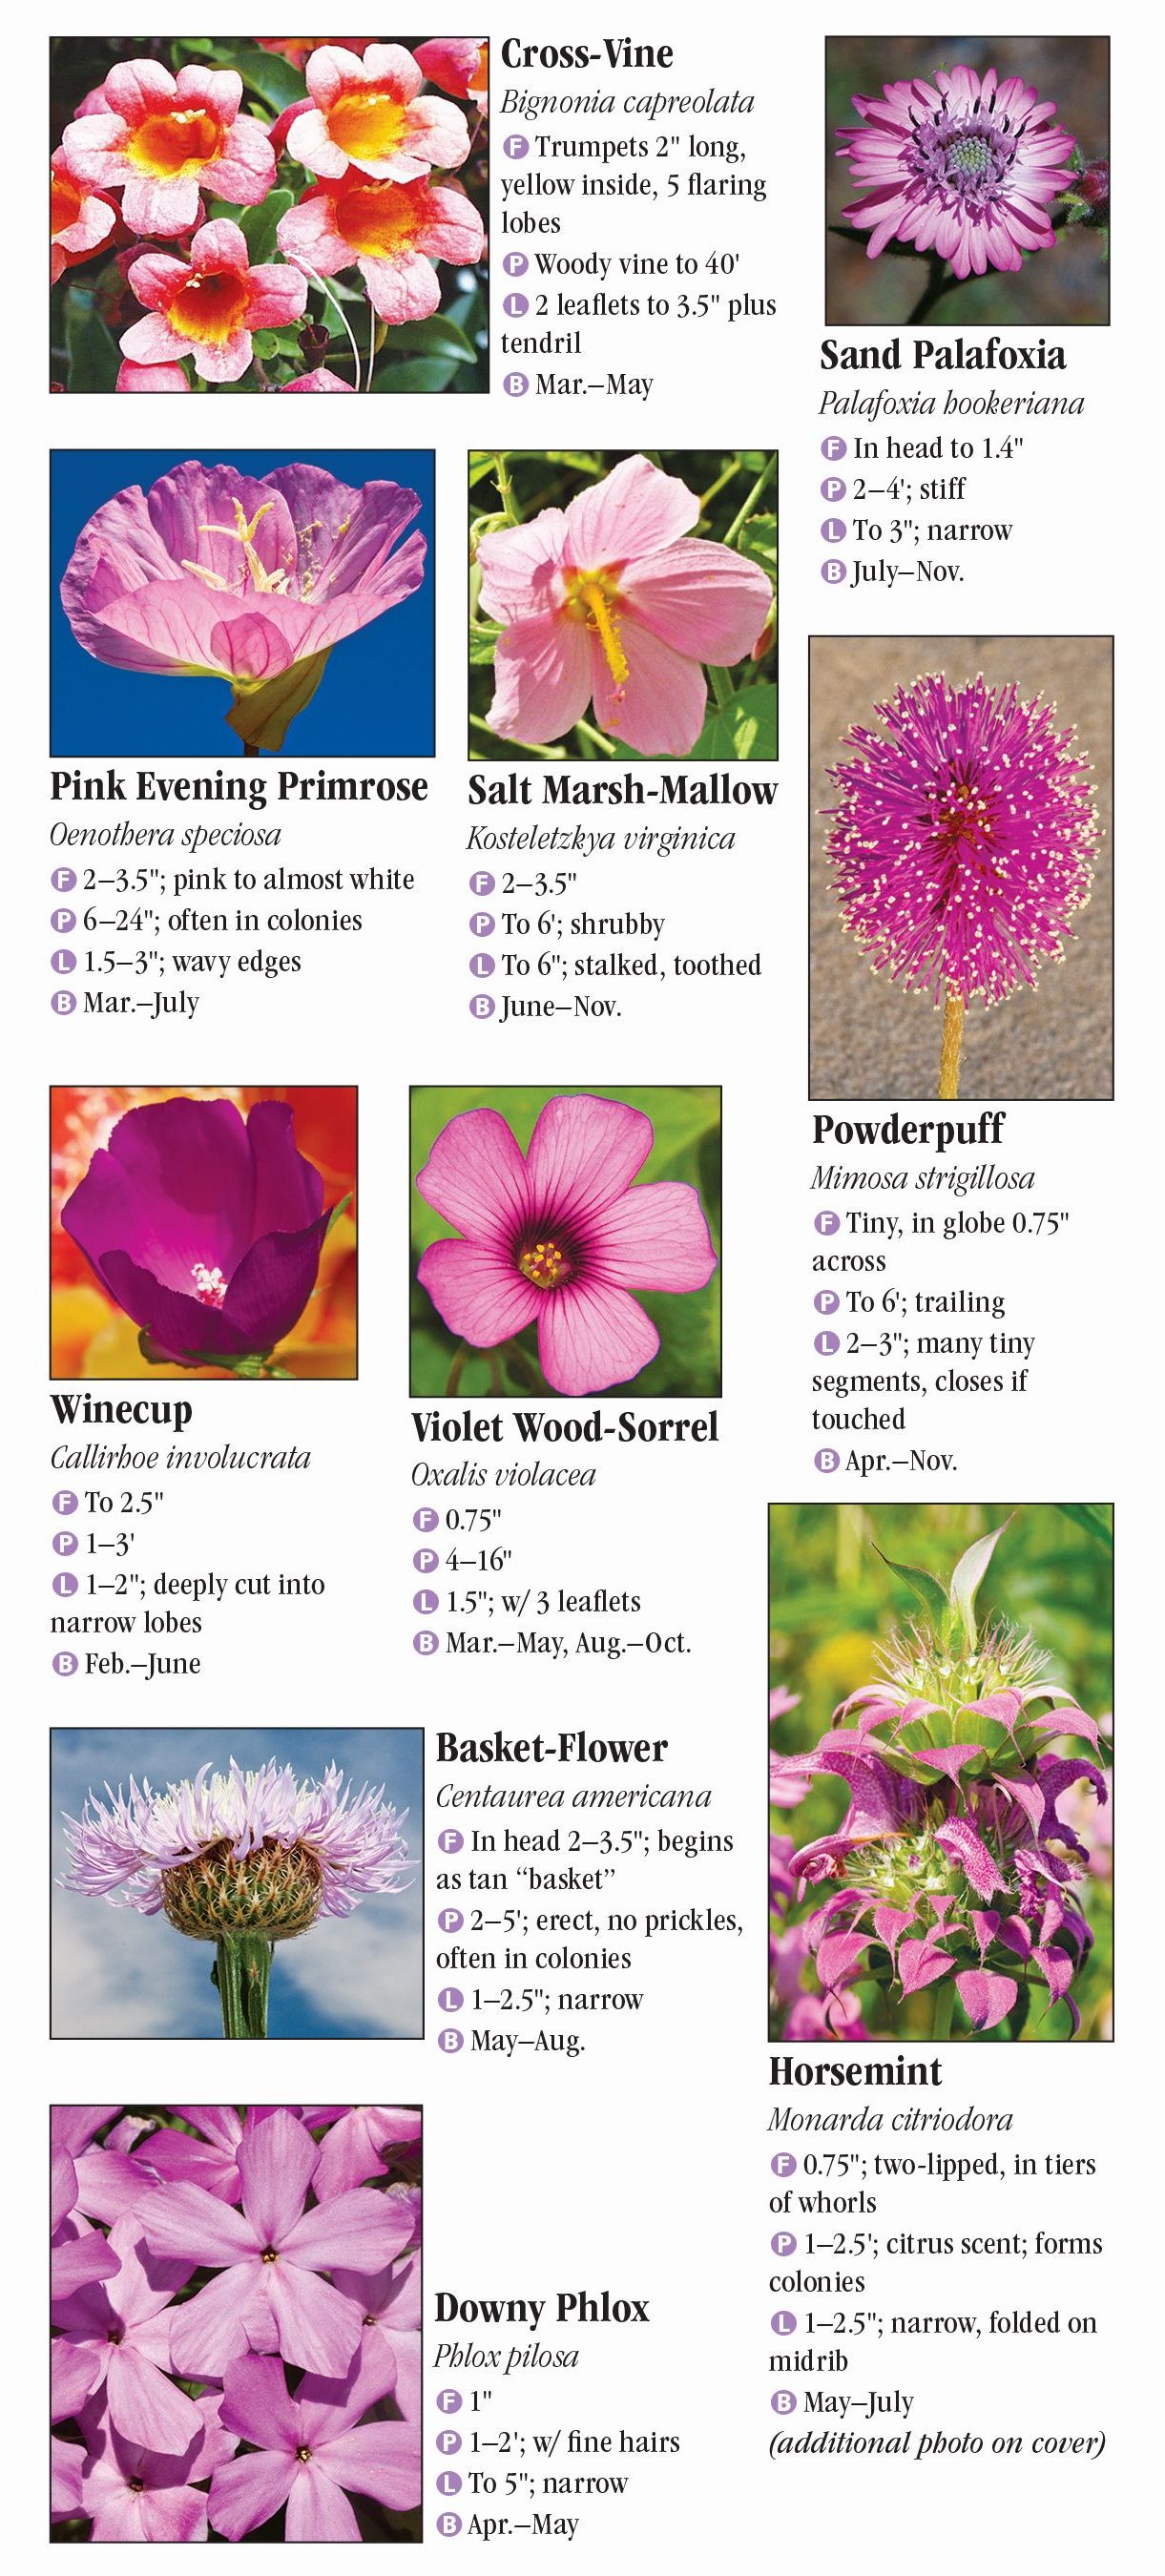 Wildflowers of Southeast Texas Quick Reference Publishing